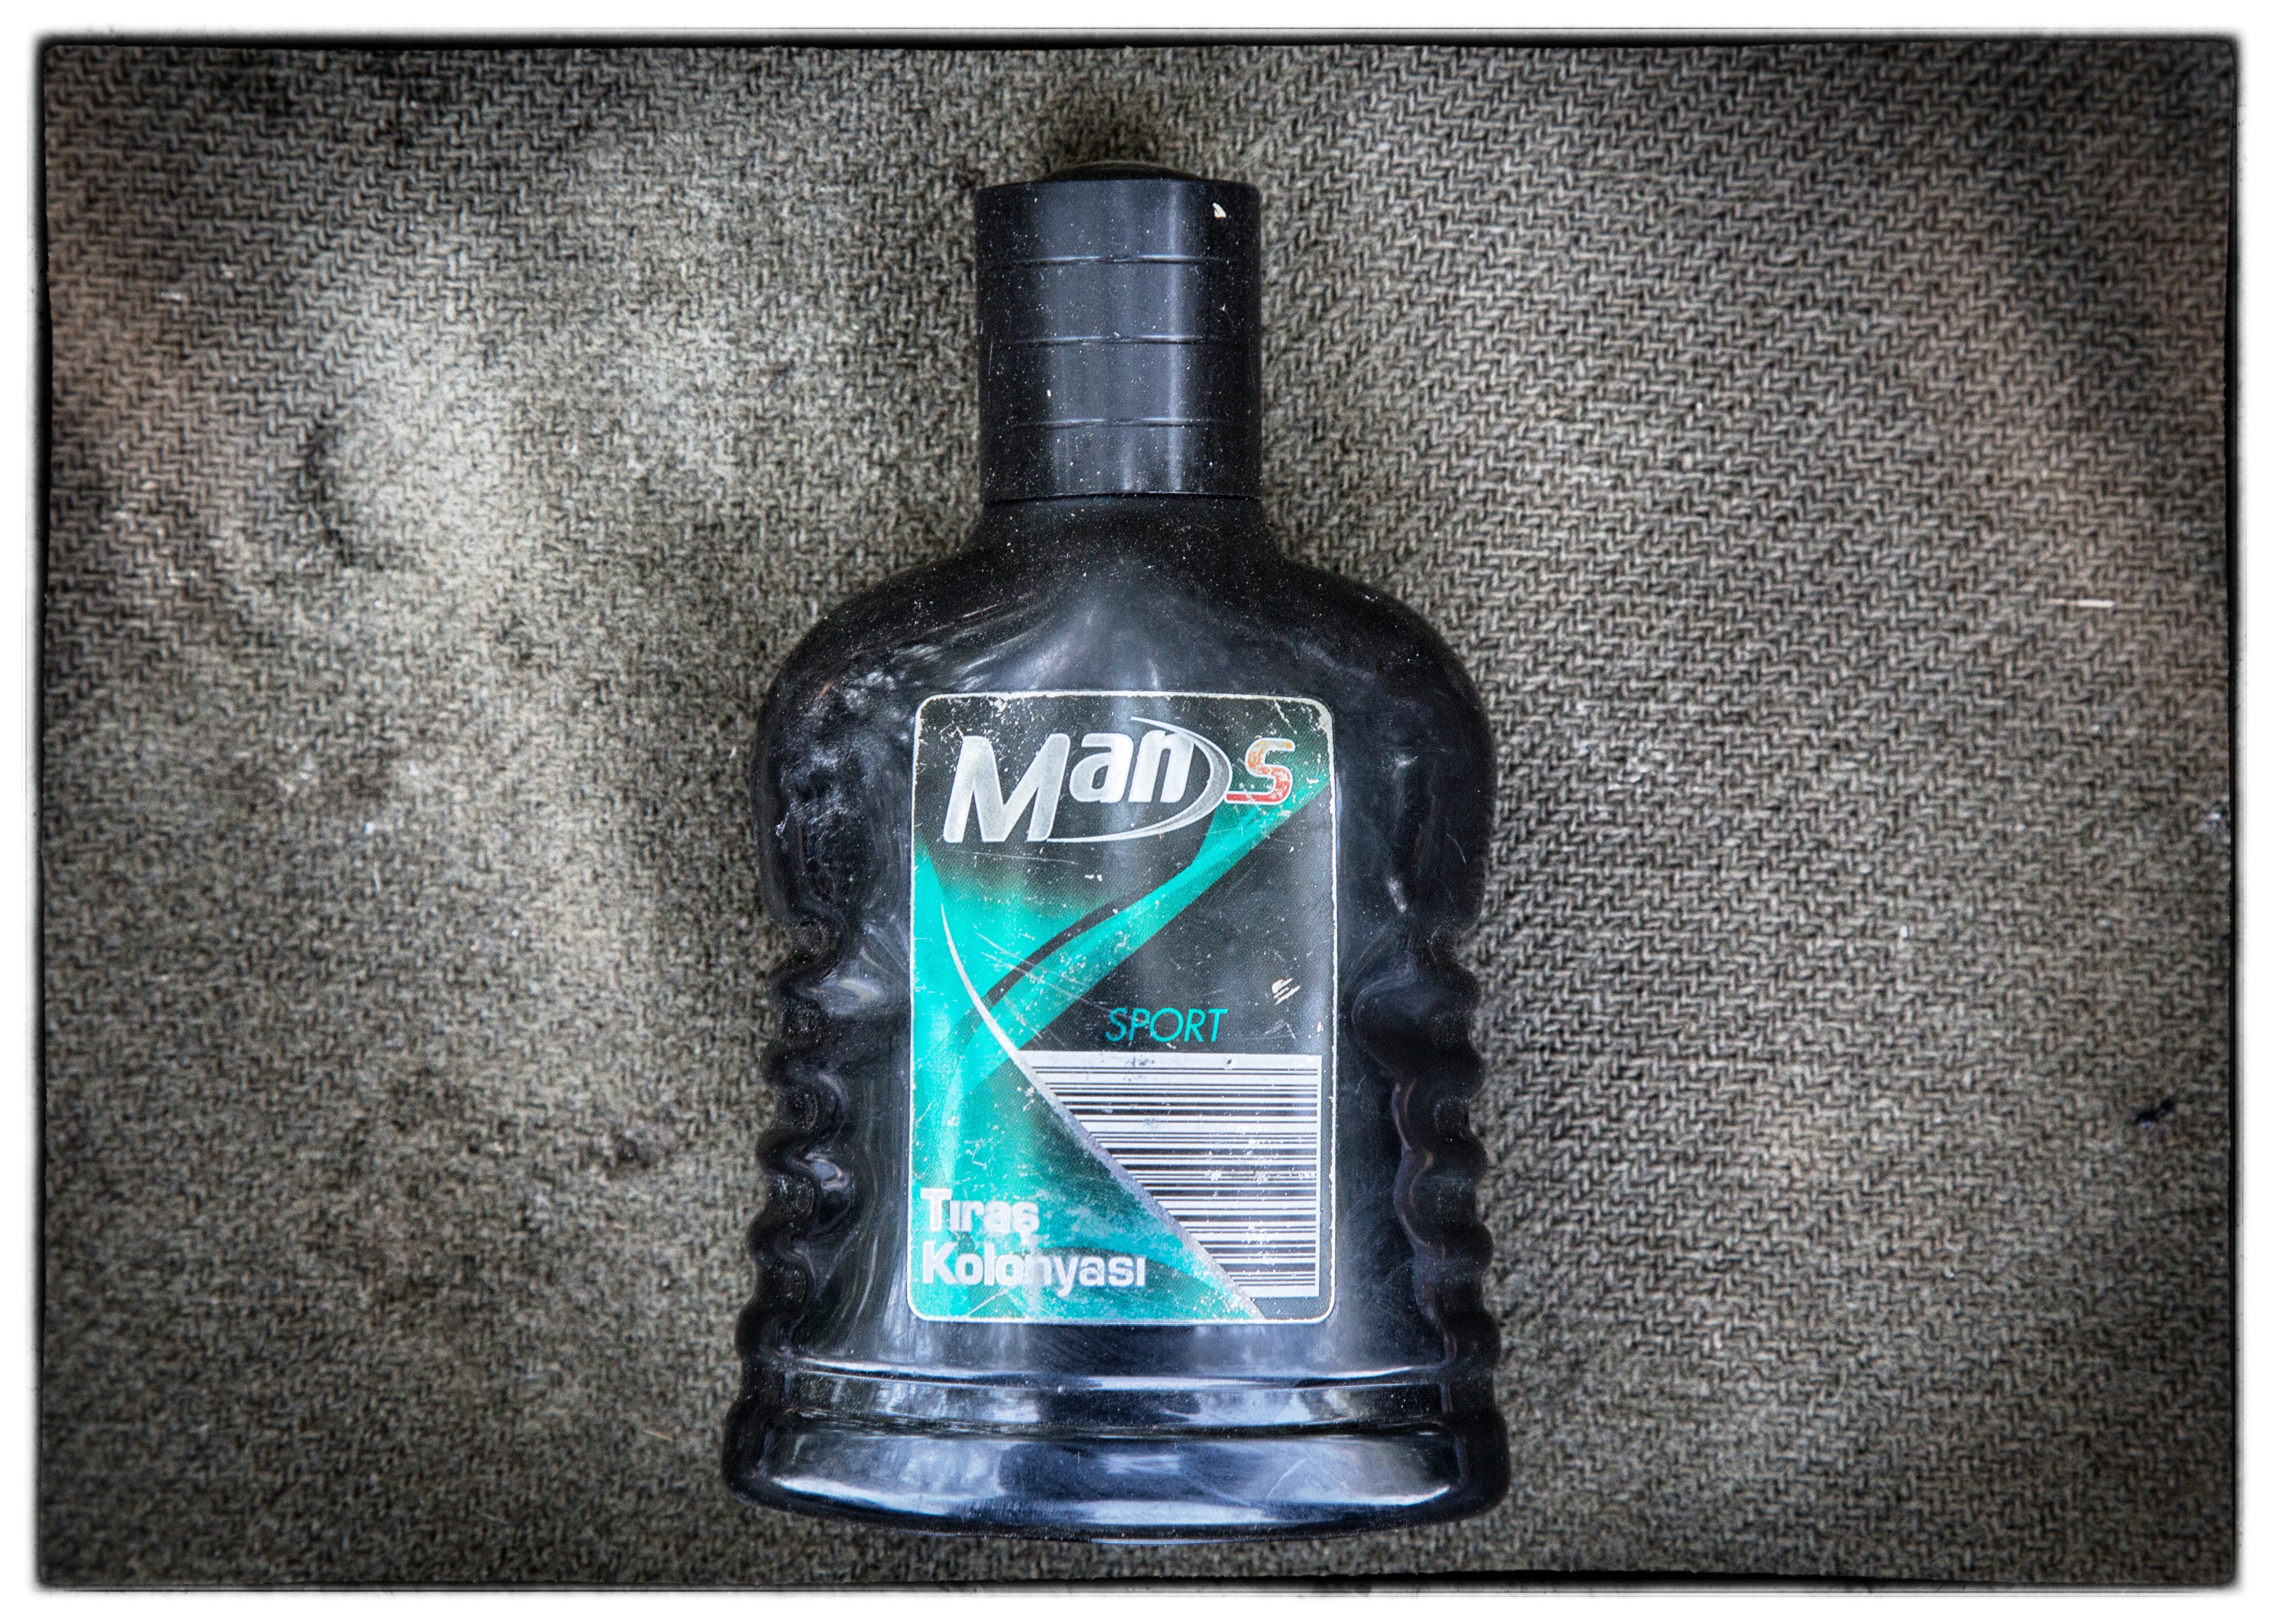 A bottle of male body wash pictured on August 13, 2015 near Szeged, Hungary | Source: Getty Images